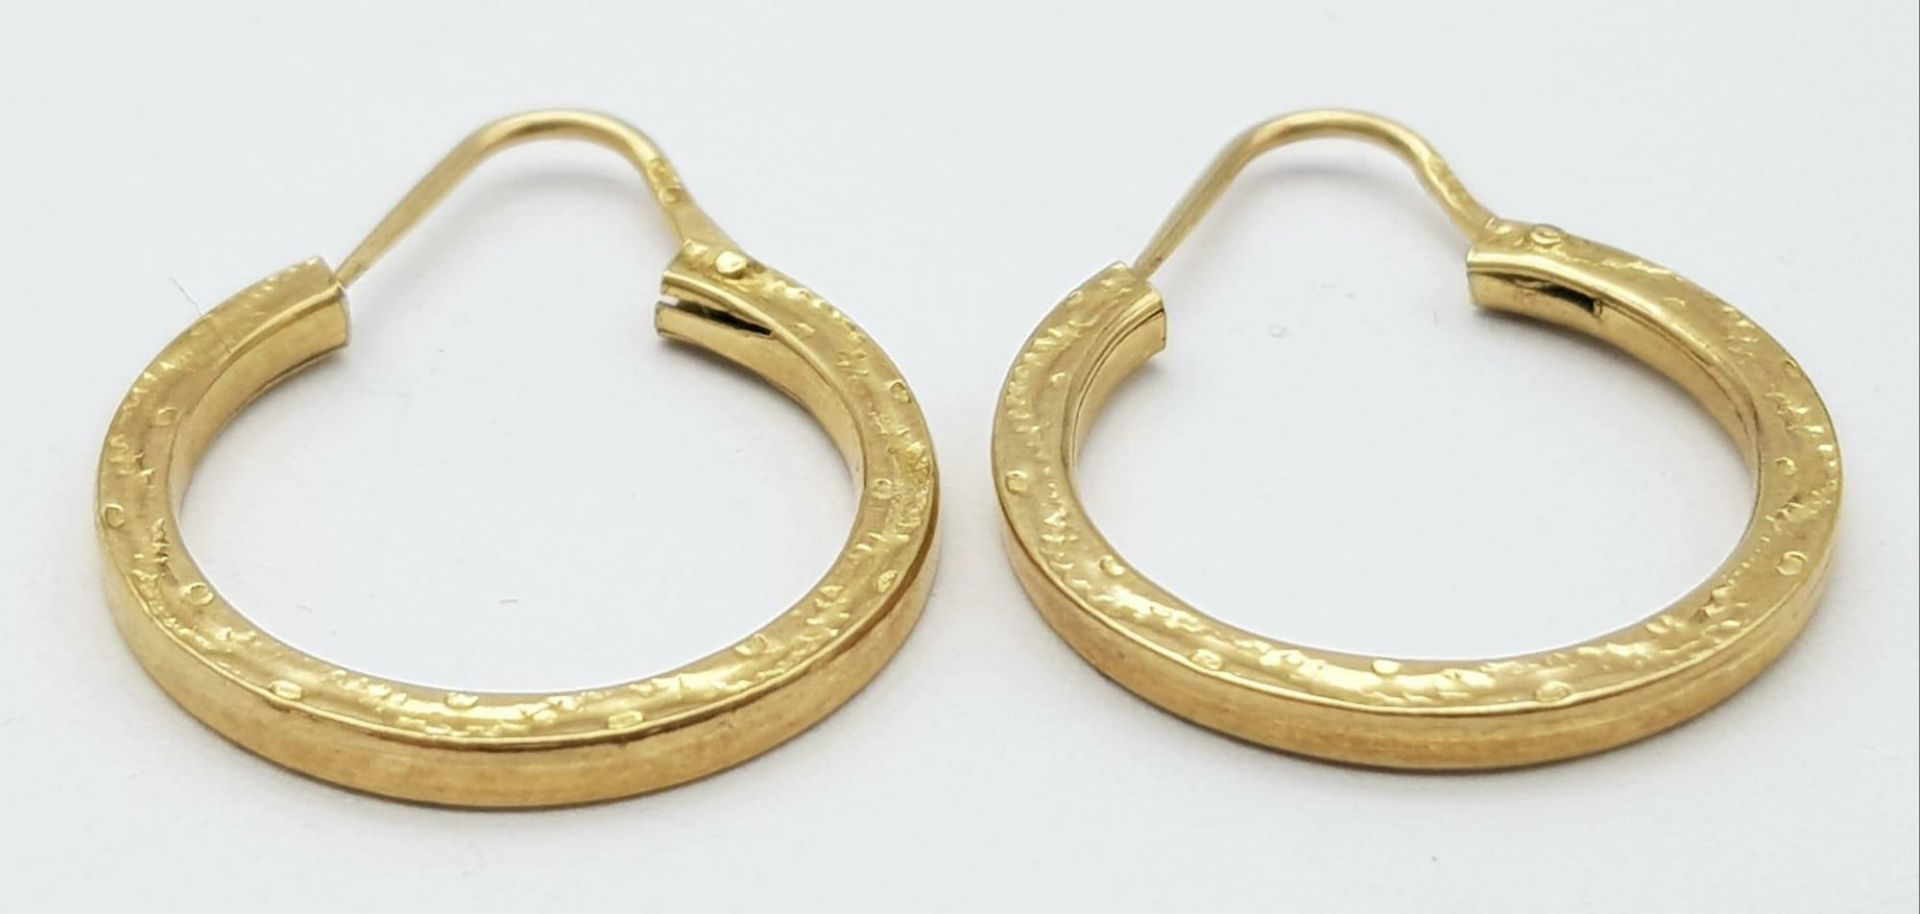 A Pair of 9K Yellow Gold Small Decorative Hoop Earrings. 1.92g weight. - Image 2 of 4